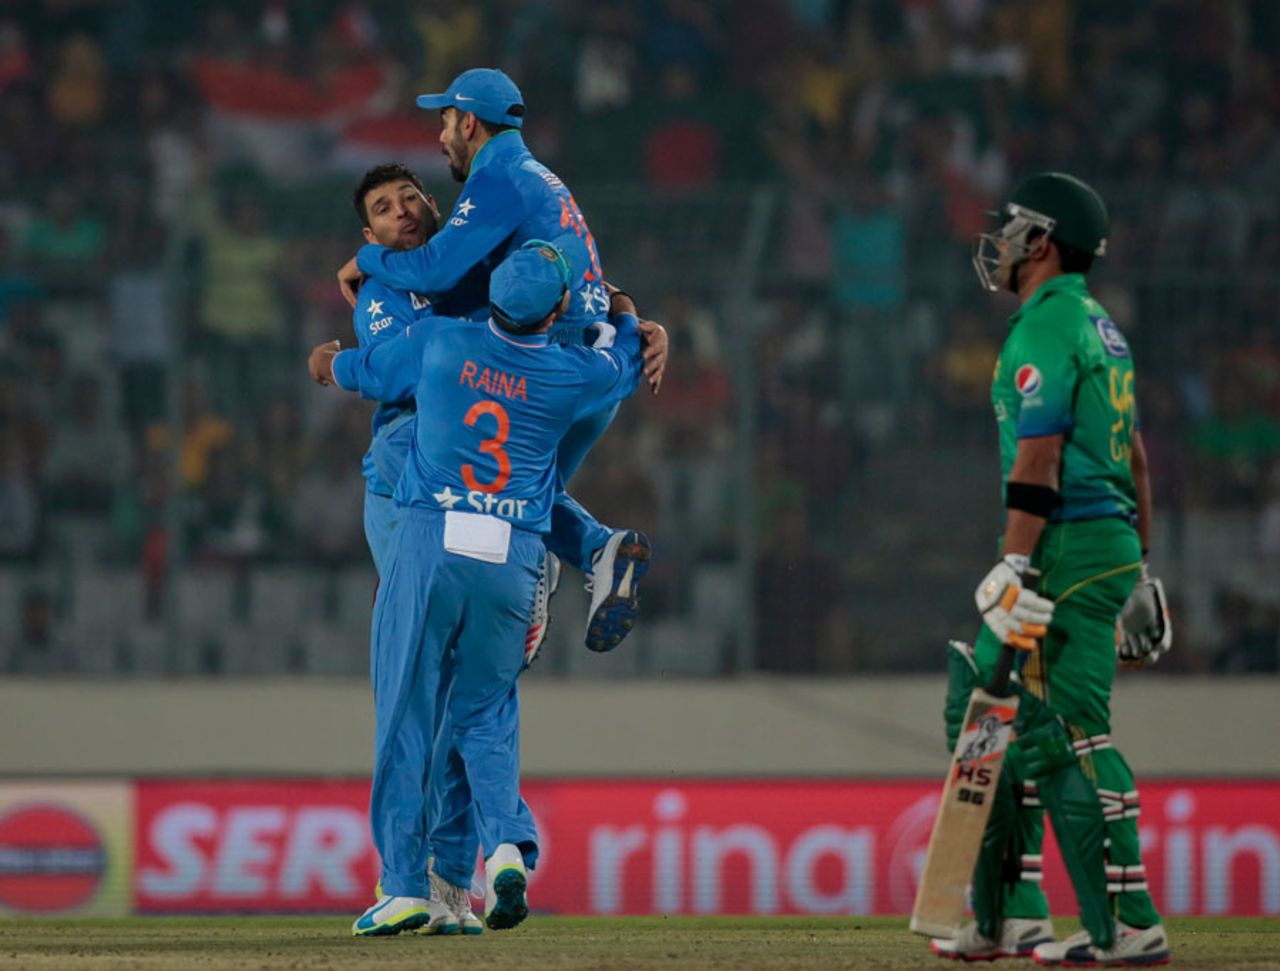 Yuvraj Singh gets more than a hug from Virat Kohli after trapping Umar Akmal, India v Pakistan, Asia Cup, Mirpur, February 27, 2016